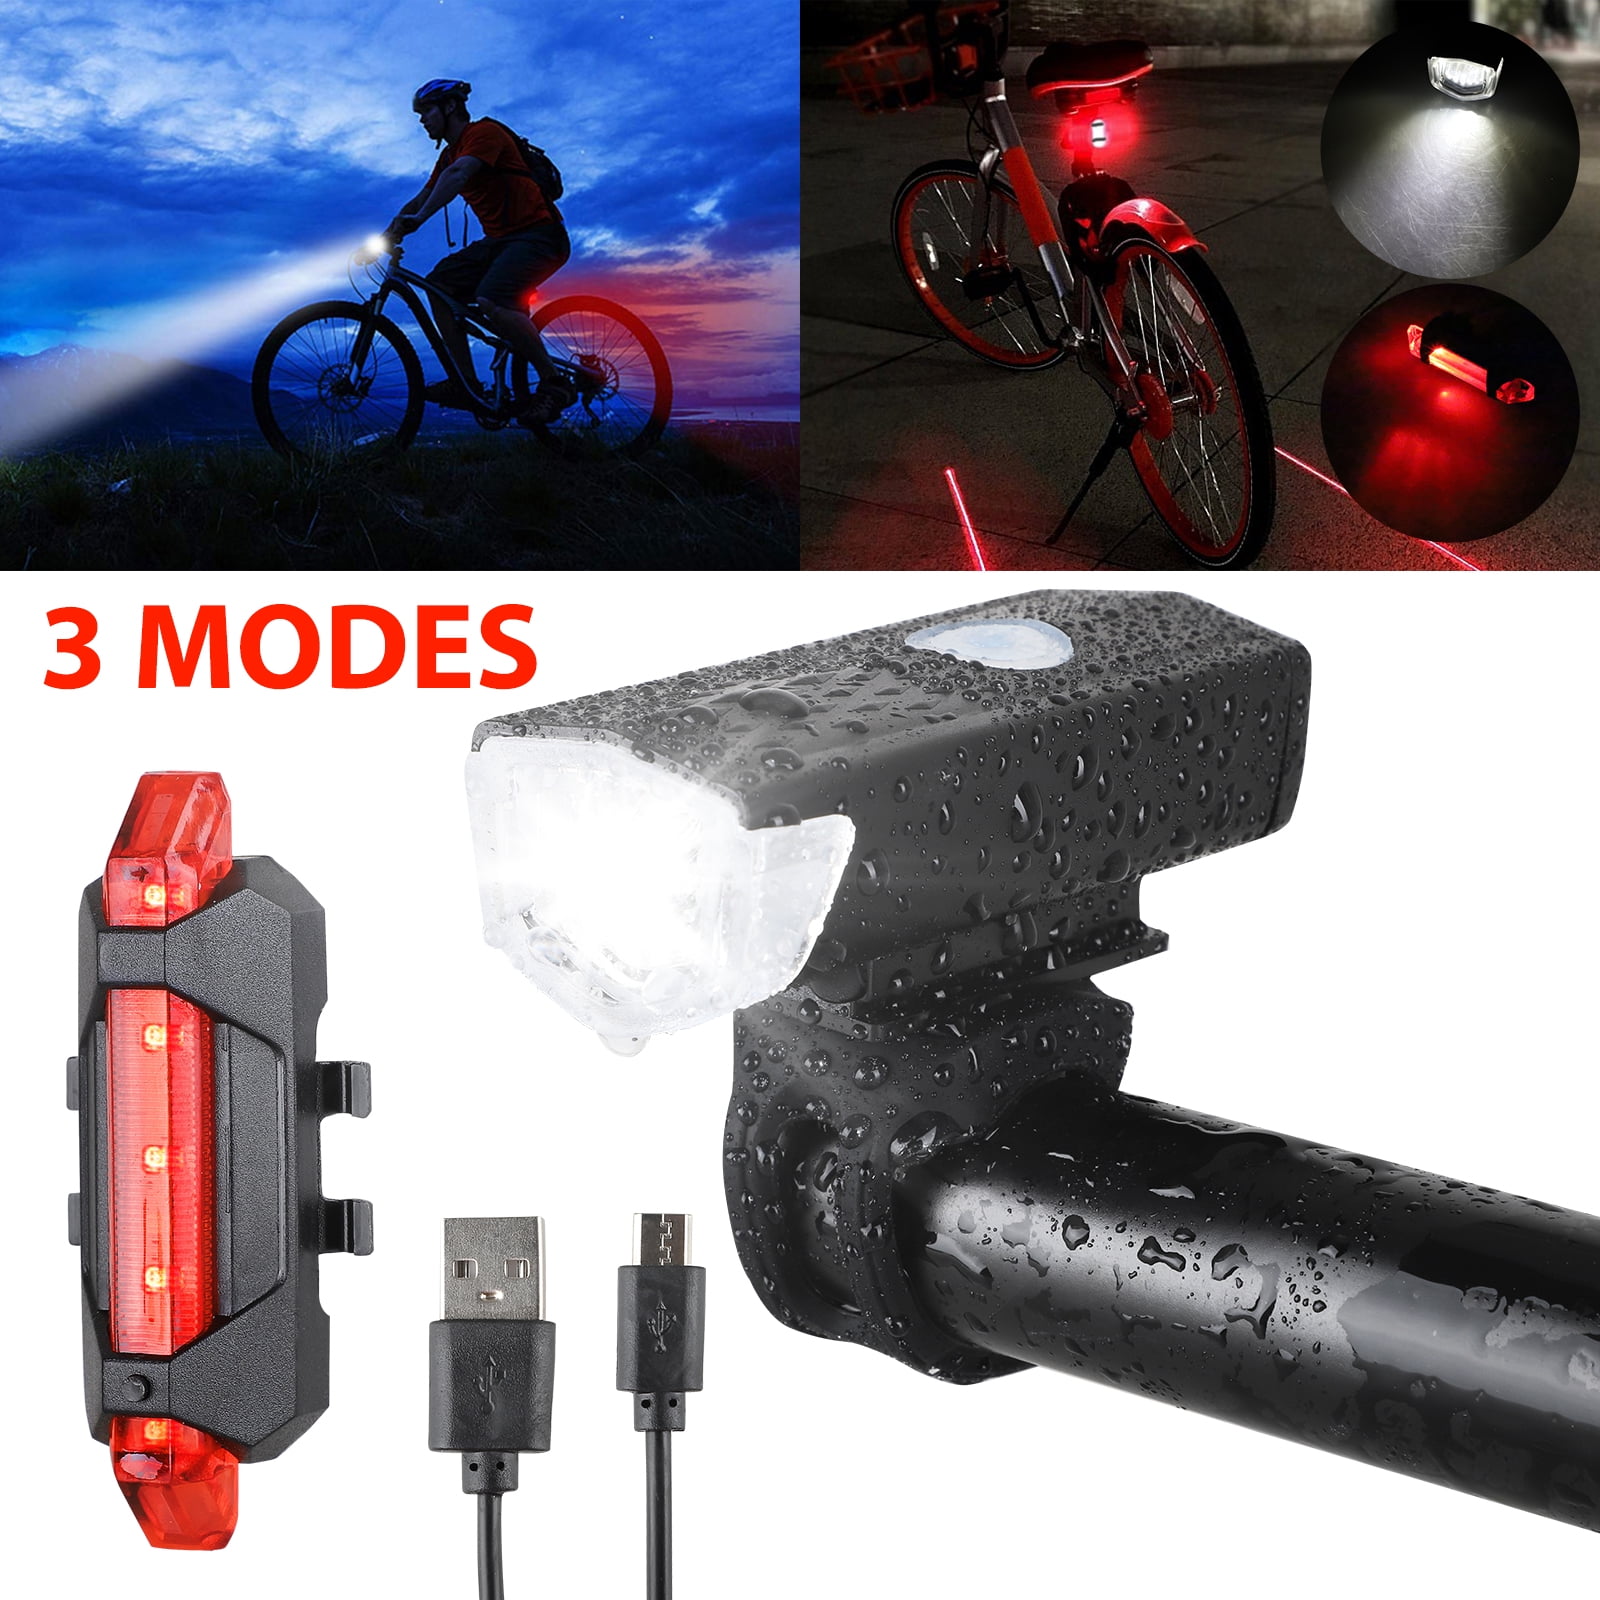 Details about   Clip-on LED Bike Lights Super Bright Waterproof Bicycle Headlight Tail Light 